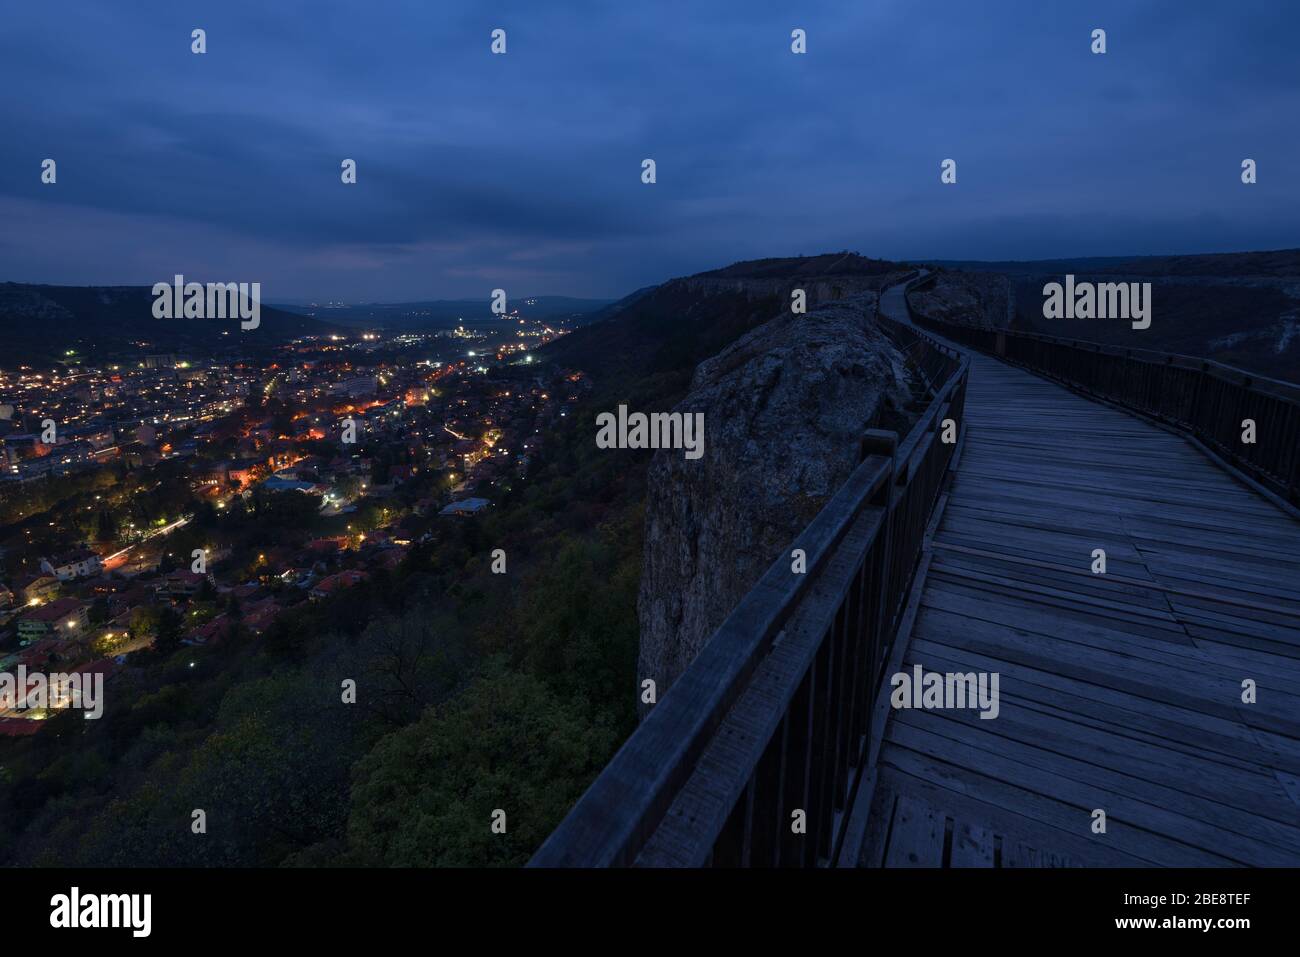 Night scene at old fortress. Nightscape of the medieval fortress Ovech near Provadia, Bulgaria Stock Photo